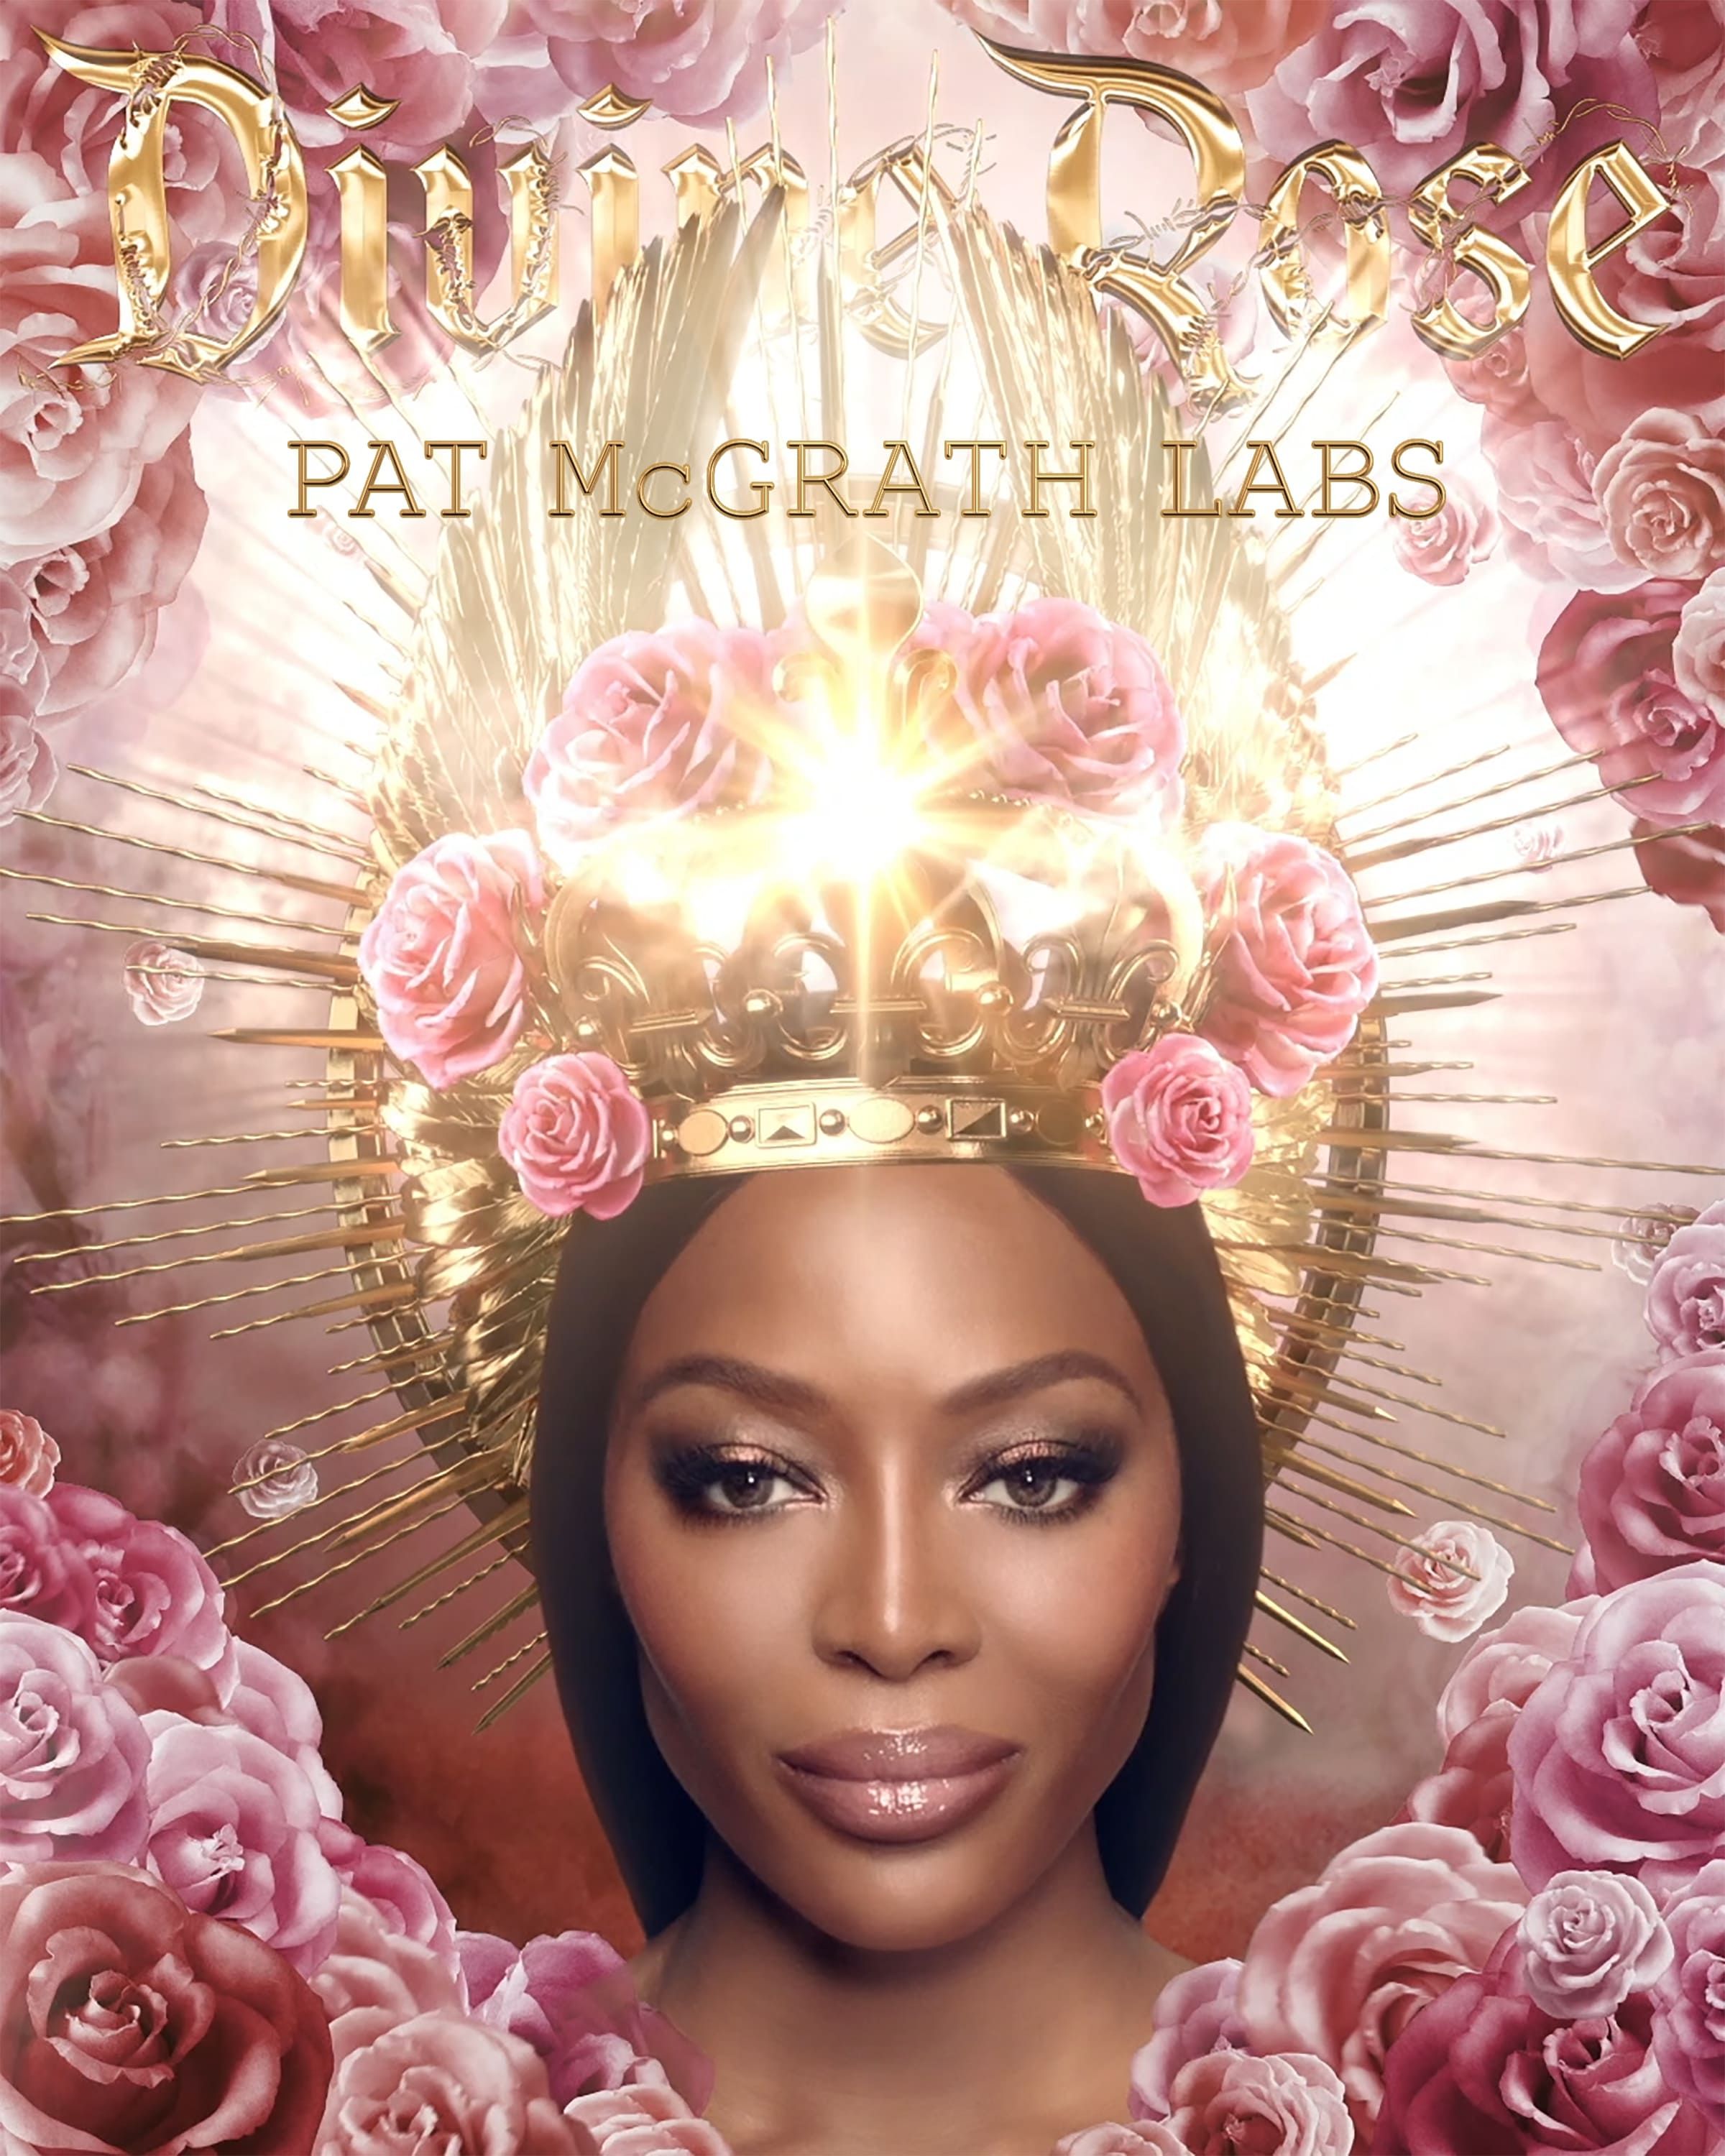 Naomi Campbell is The First-ever Global Face of Pat McGrath Labs